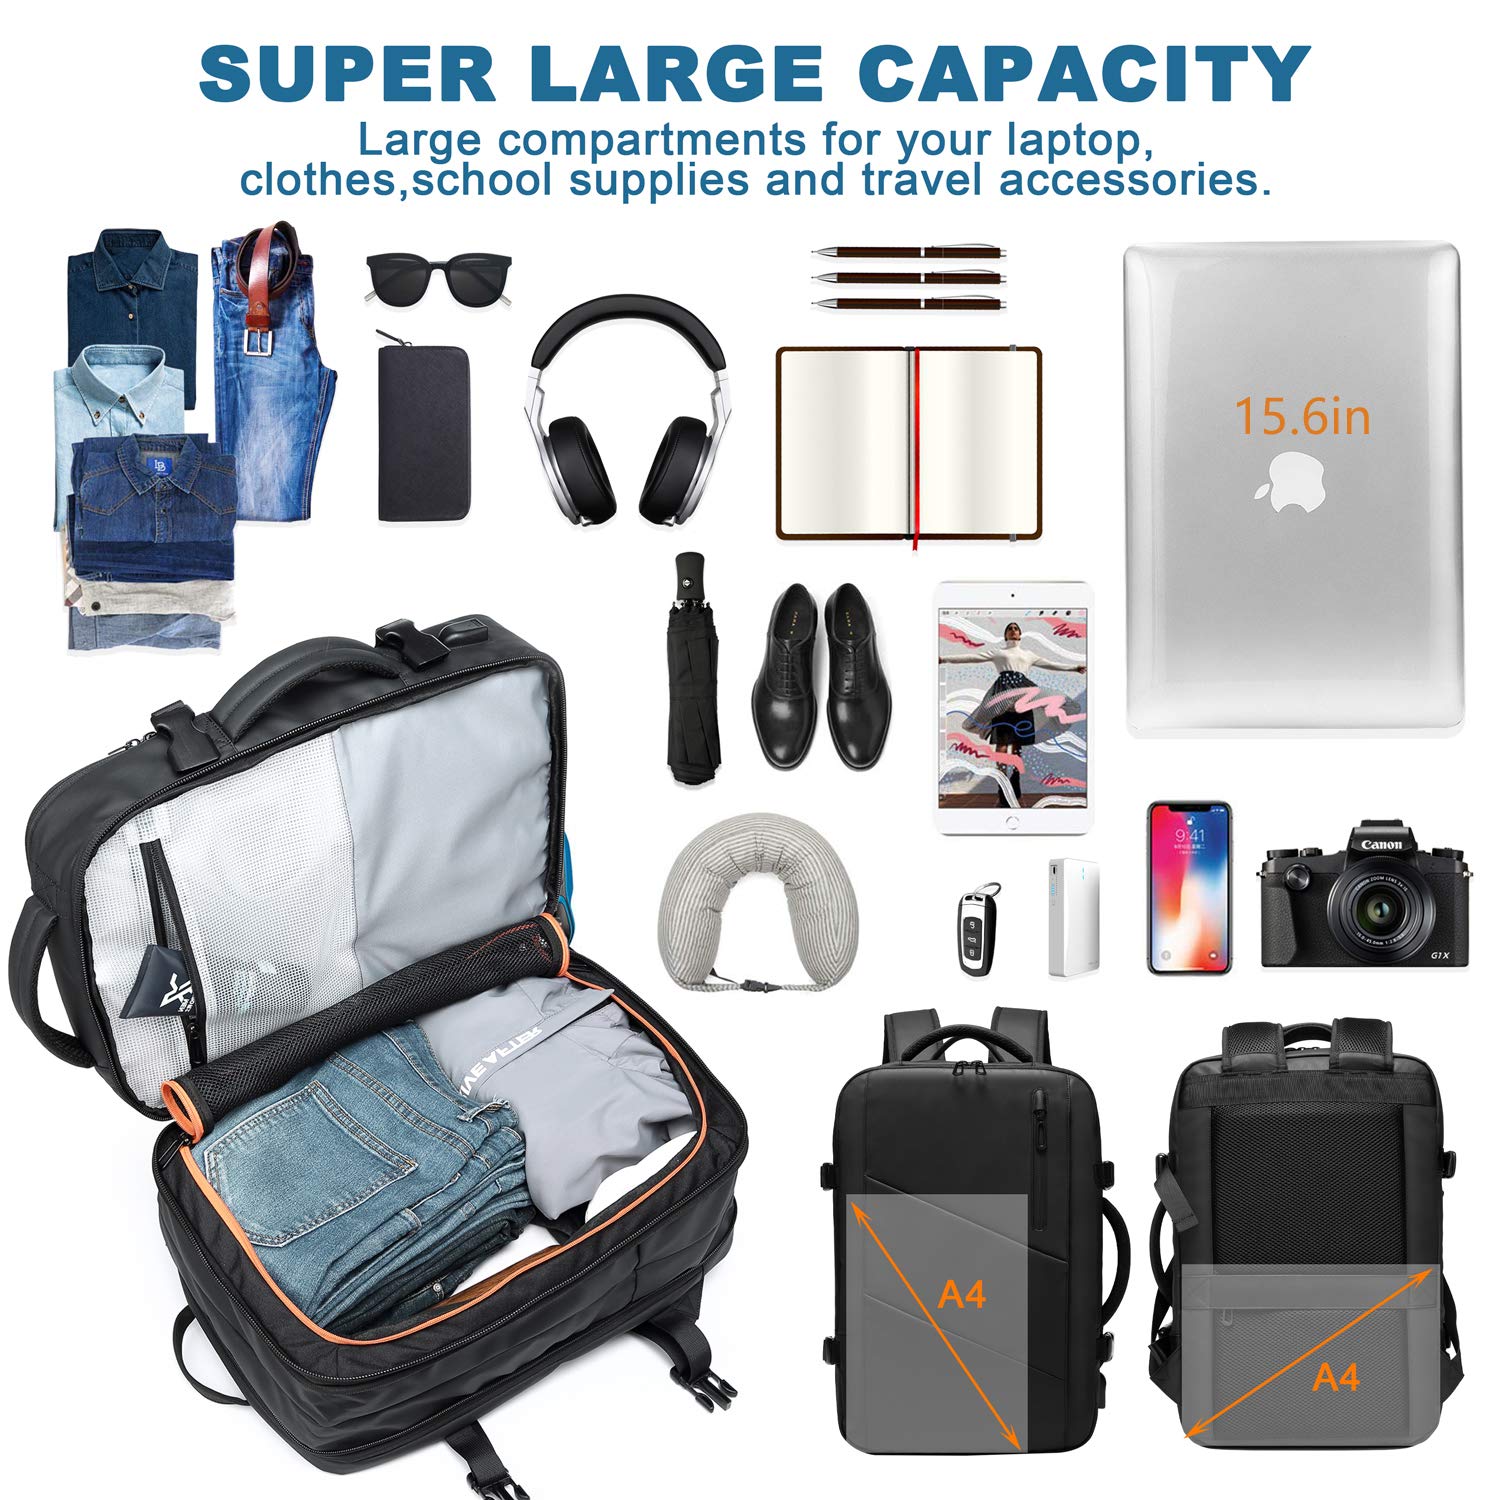 Travel Backpack,WUAYUR 15.6inch Laptop Backpack w/USB Port,40L Carry On Luggage